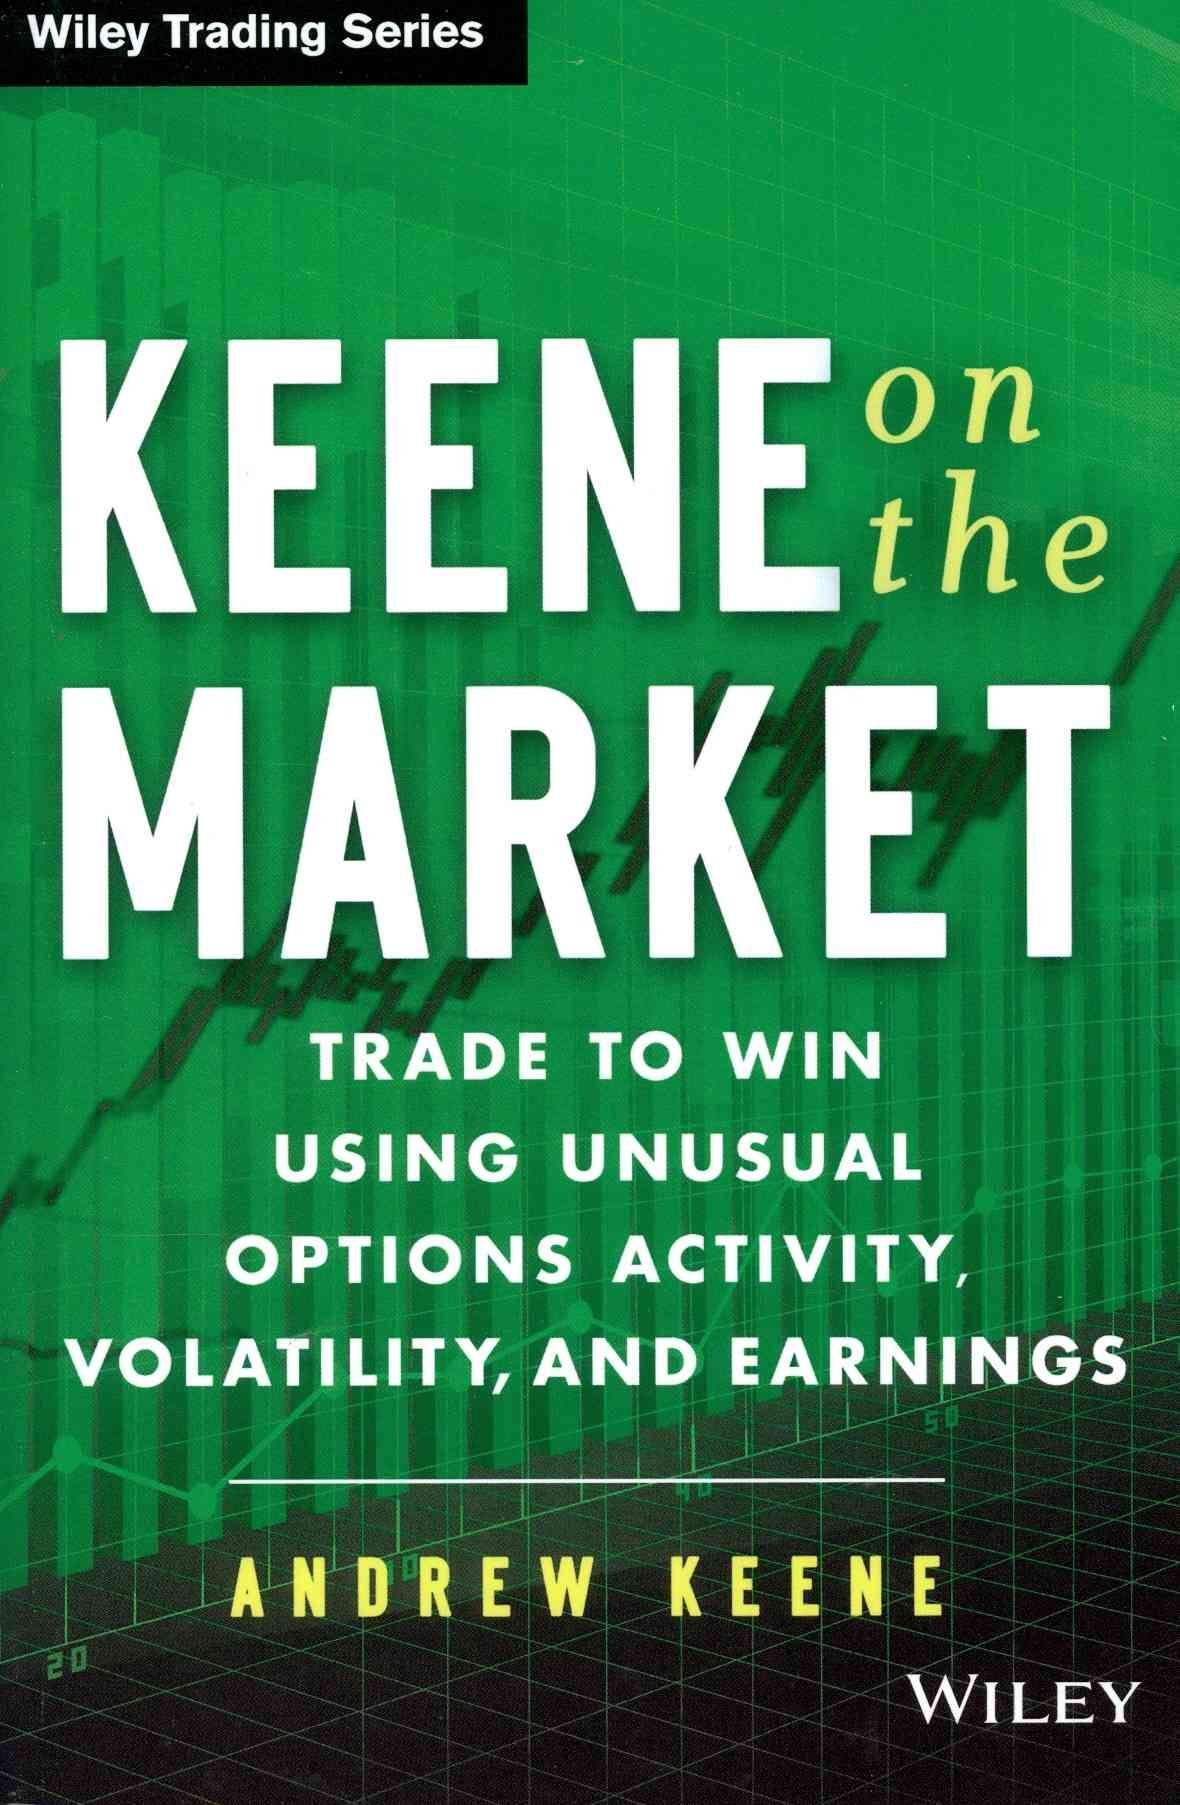 Keene on the Market - Trade to Win Using Unusual Options Activity, Volatility, and Earnings